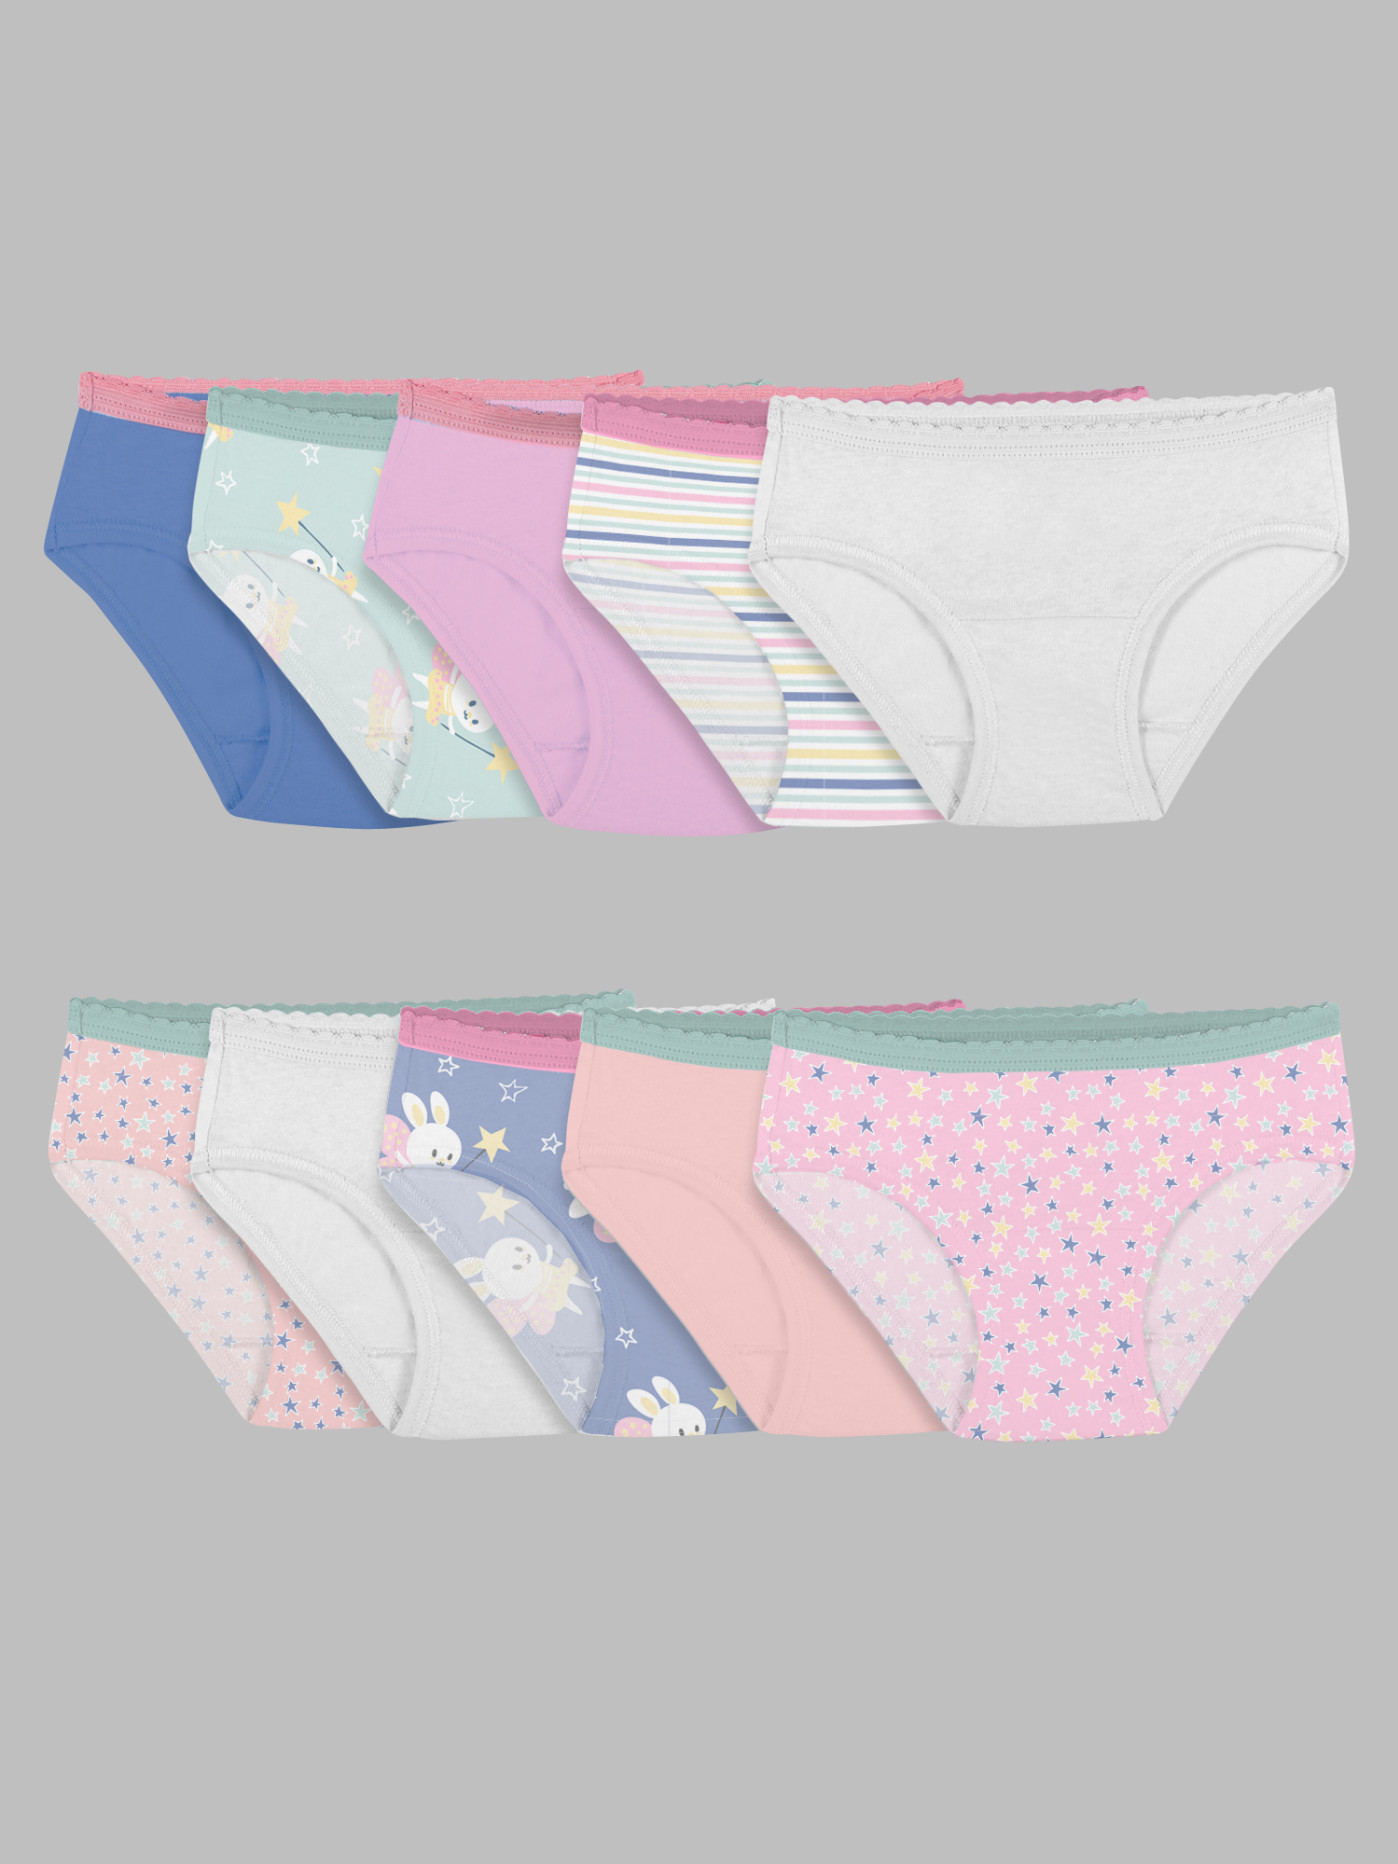 Fruit Of The Loom Toddler Girls' Hipsters Girls Underwear Size 4T 